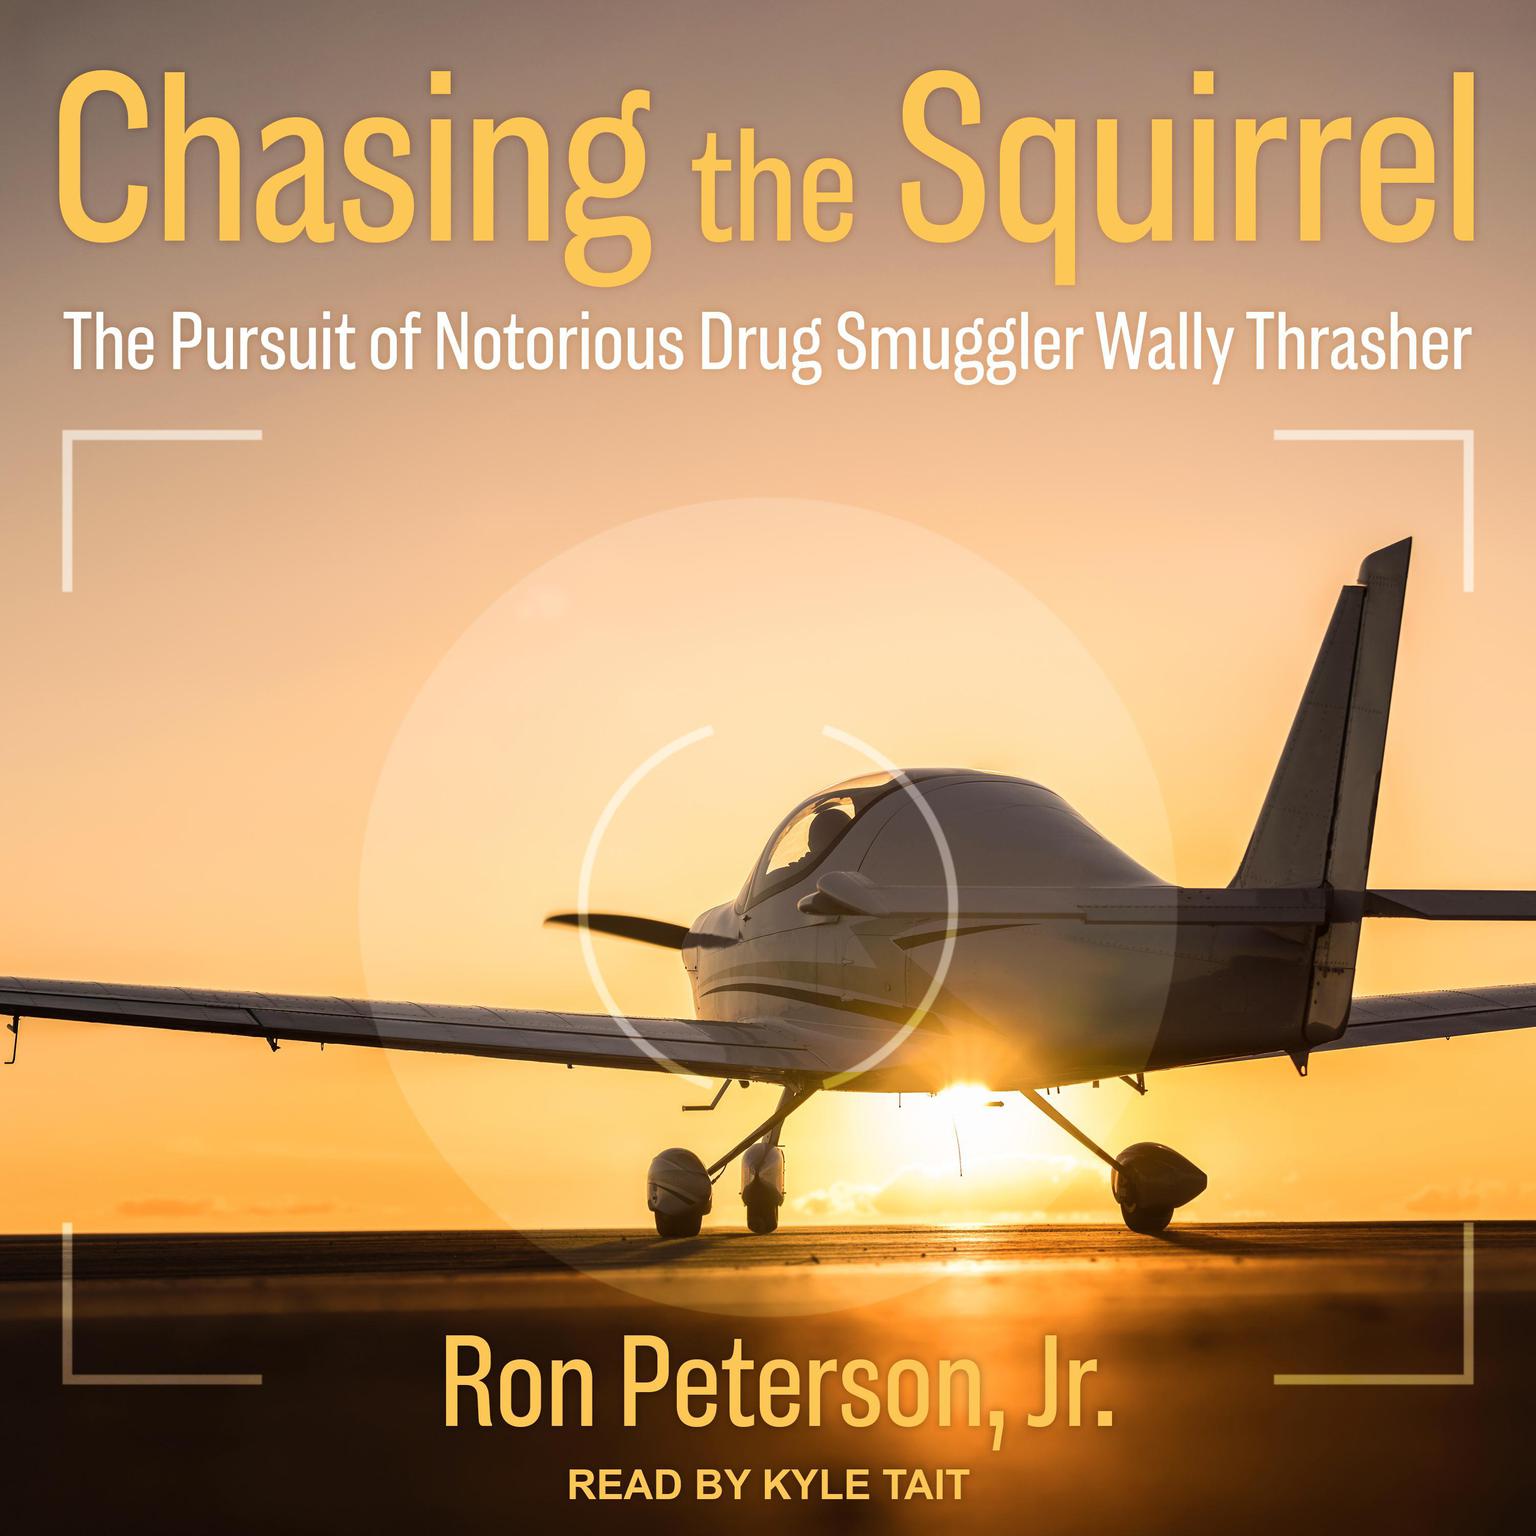 Chasing the Squirrel: The Pursuit of Notorious Drug Smuggler Wally Thrasher Audiobook, by Ron Peterson